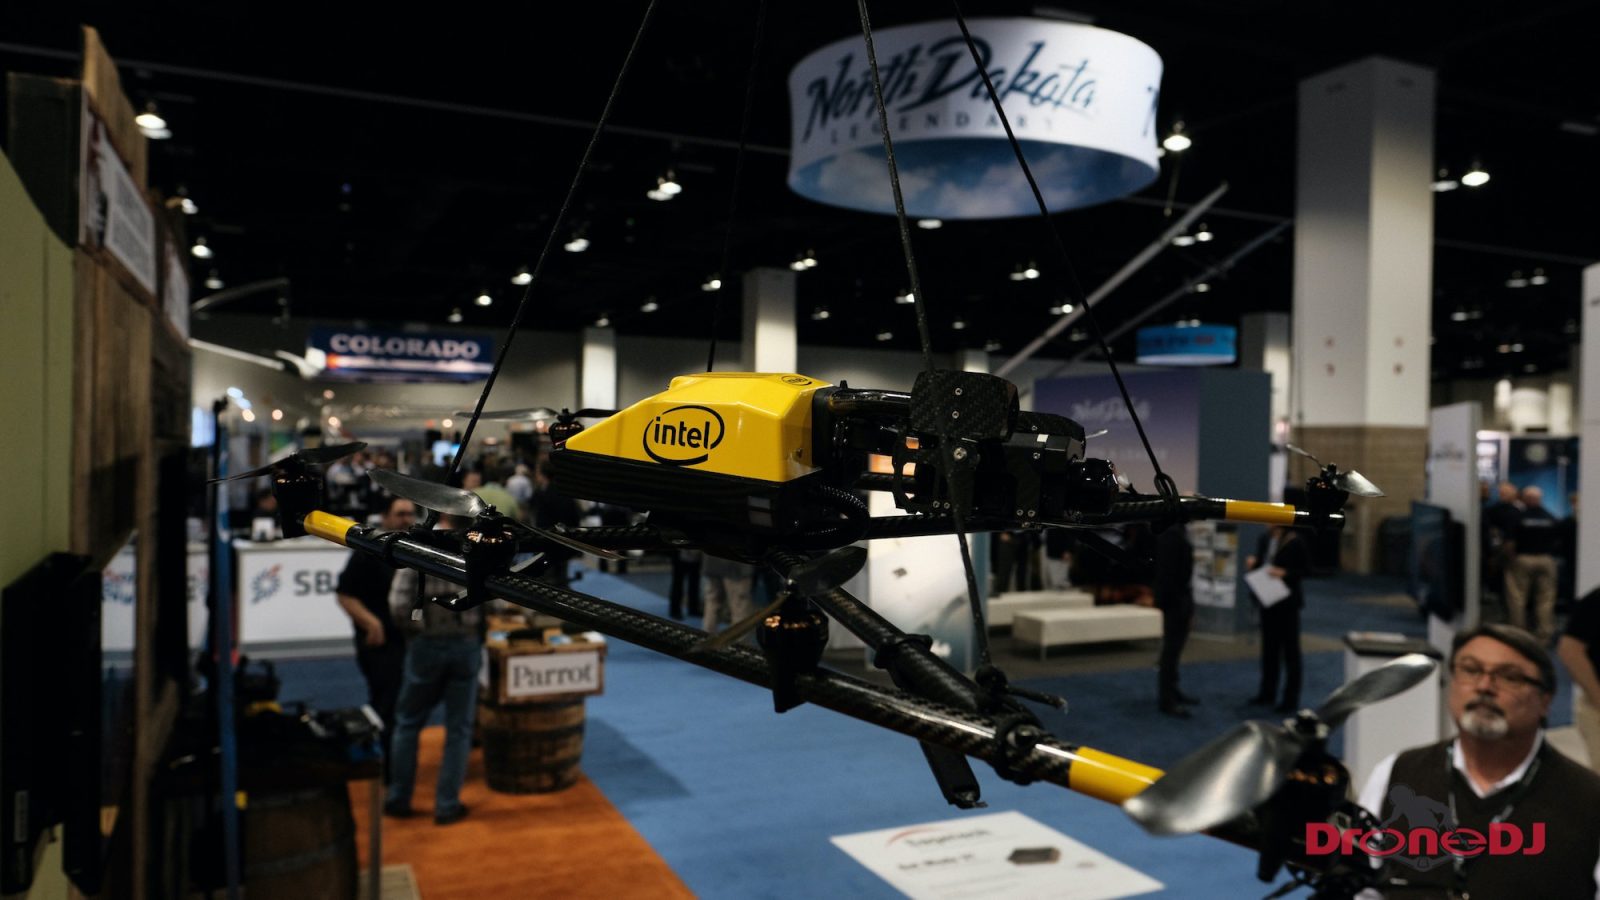 Press release: Intel announced hardware and software updates to the commercial drone ecosystem, including the world’s first UL 3030 certification